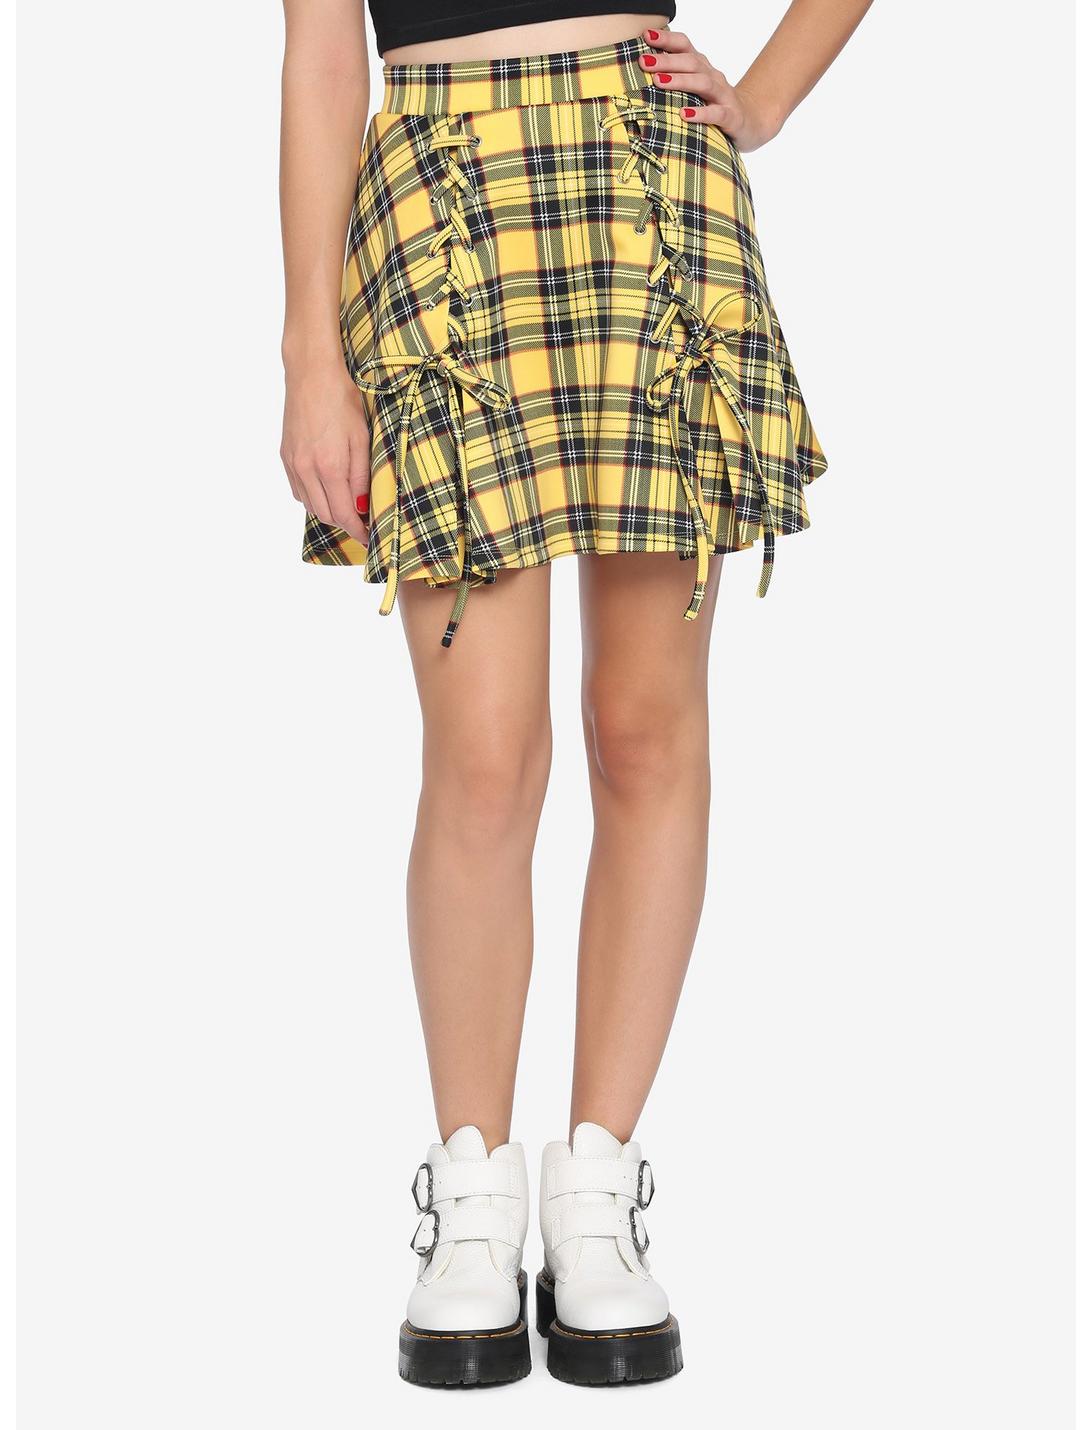 Yellow Plaid Lace-Up Skirt, PLAID - YELLOW, hi-res